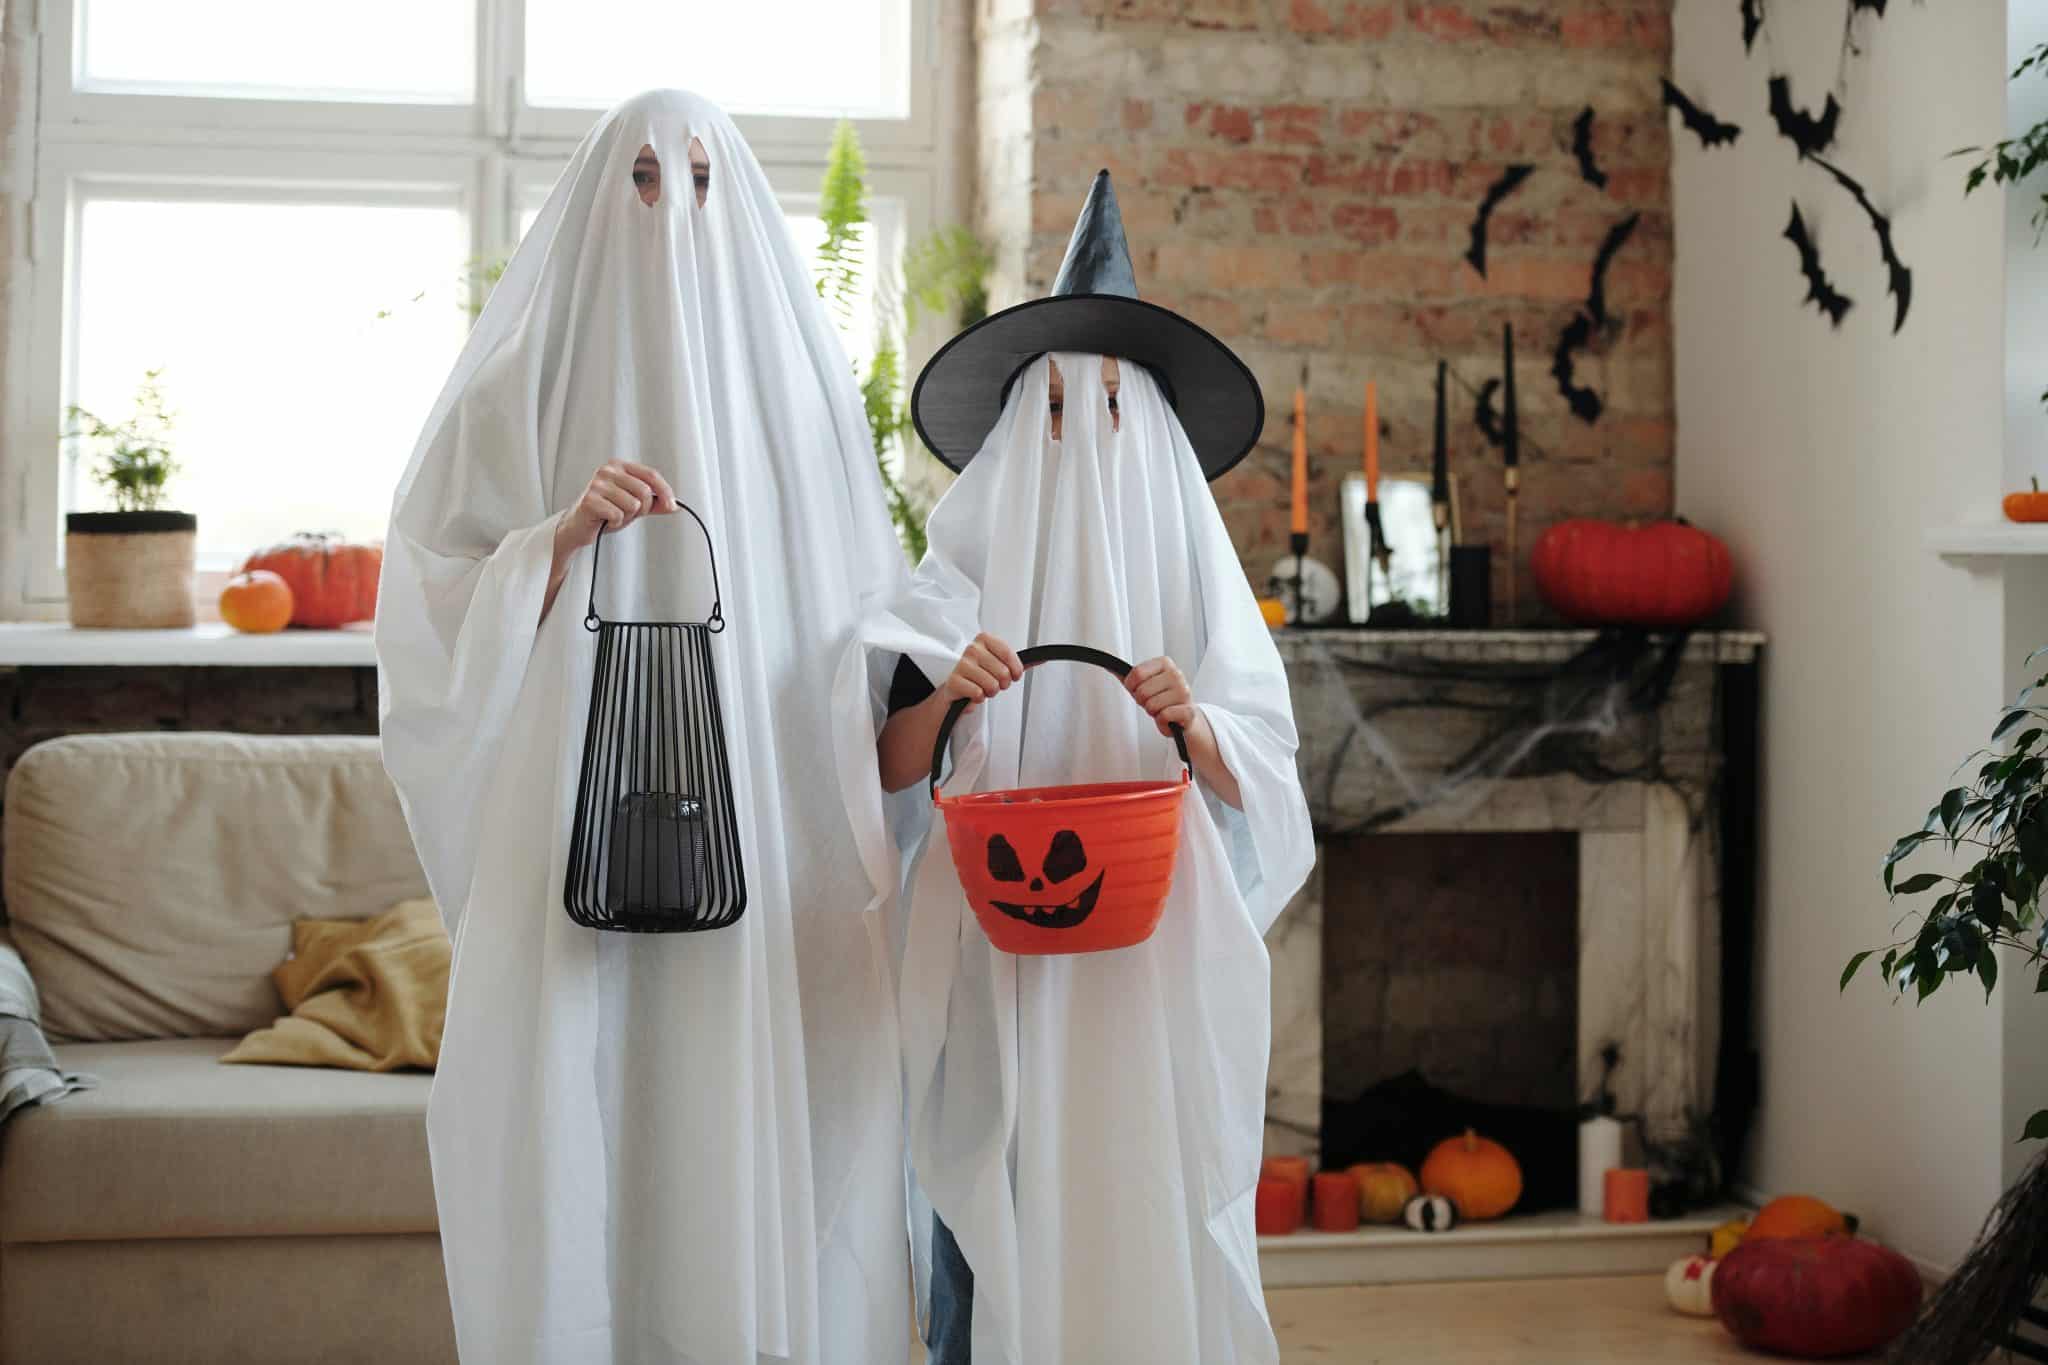 A parent and child dressed up as ghosts for Halloween.